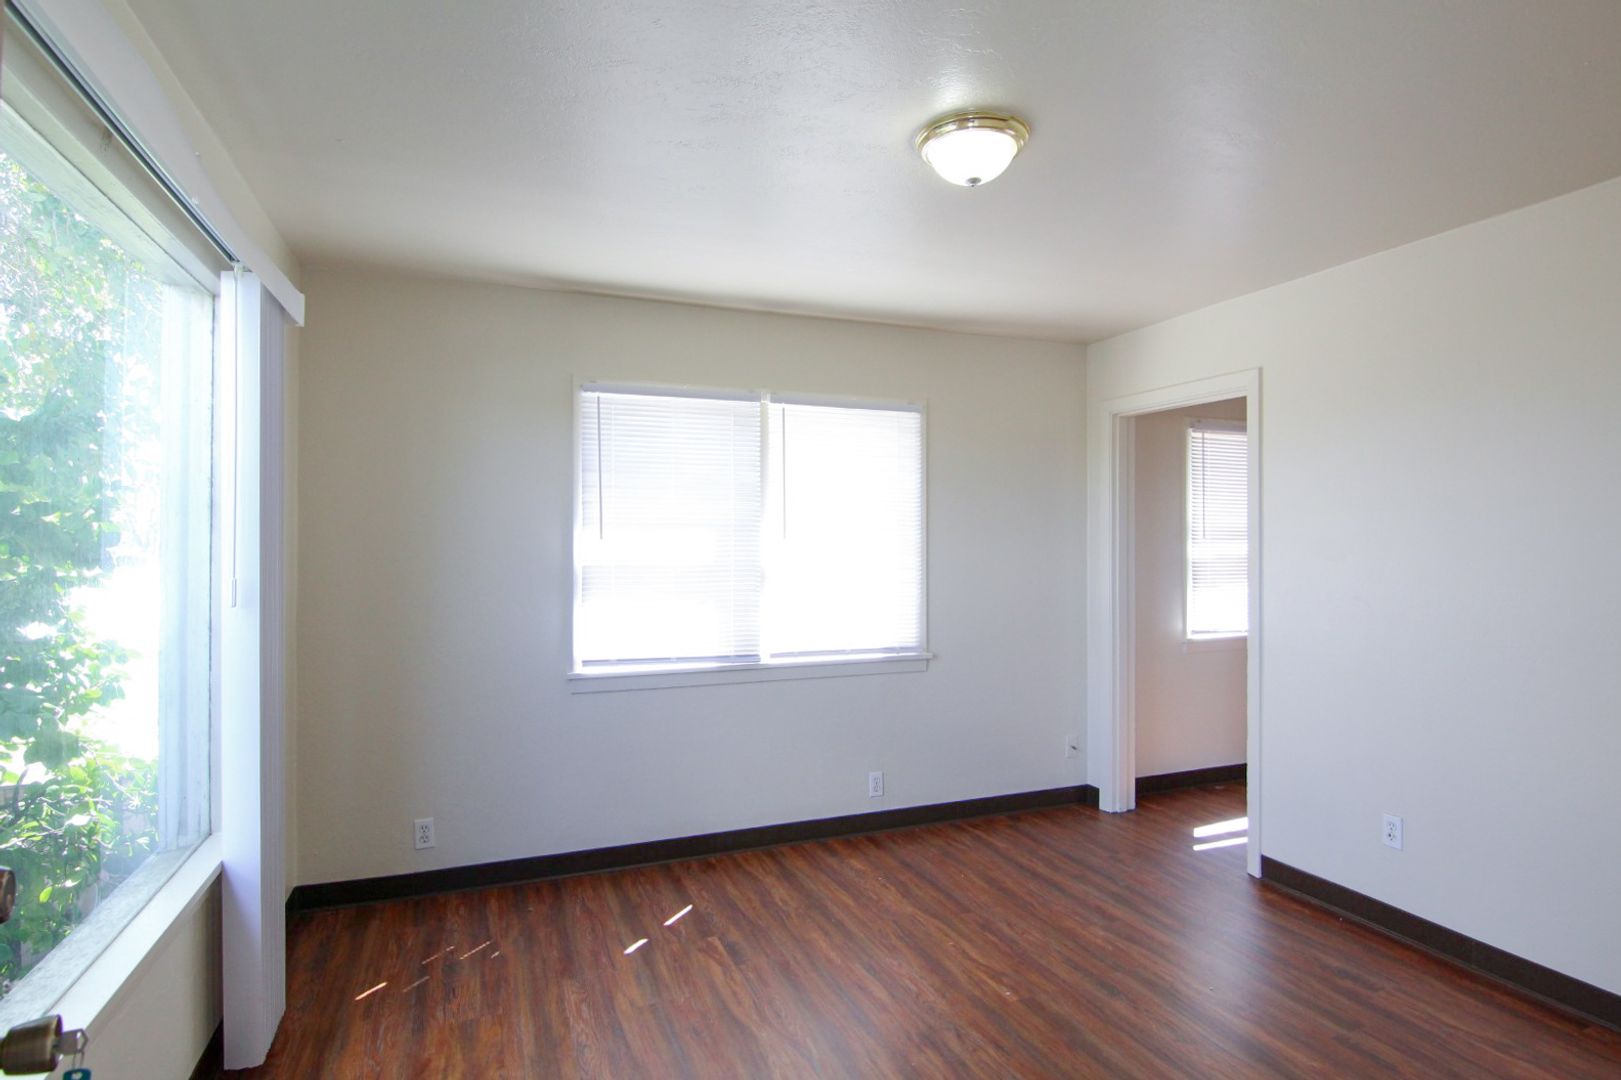 Conveniently Located Duplex Unit with Laundry Room